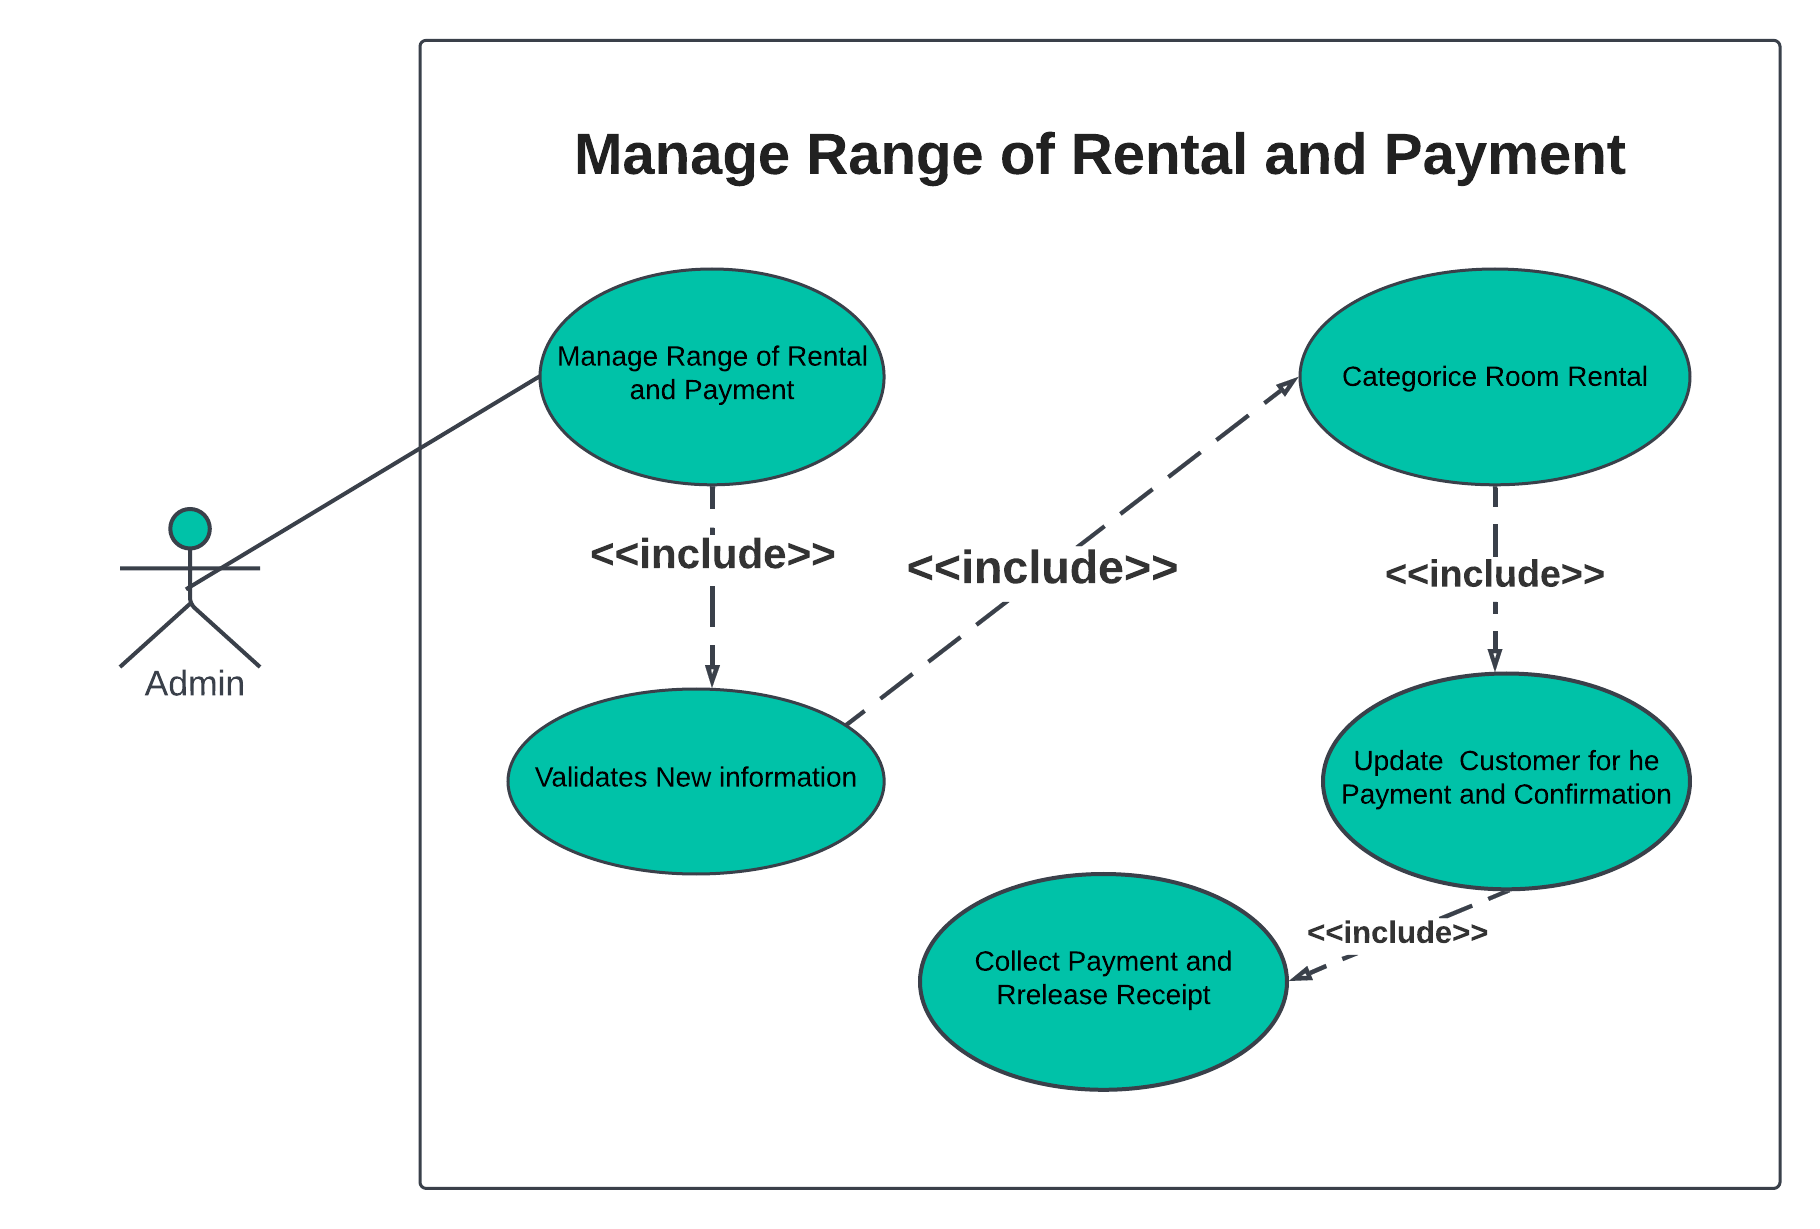 MANAGE RANGE OF RENTAL AND PAYMENT USE CASE DIAGRAM